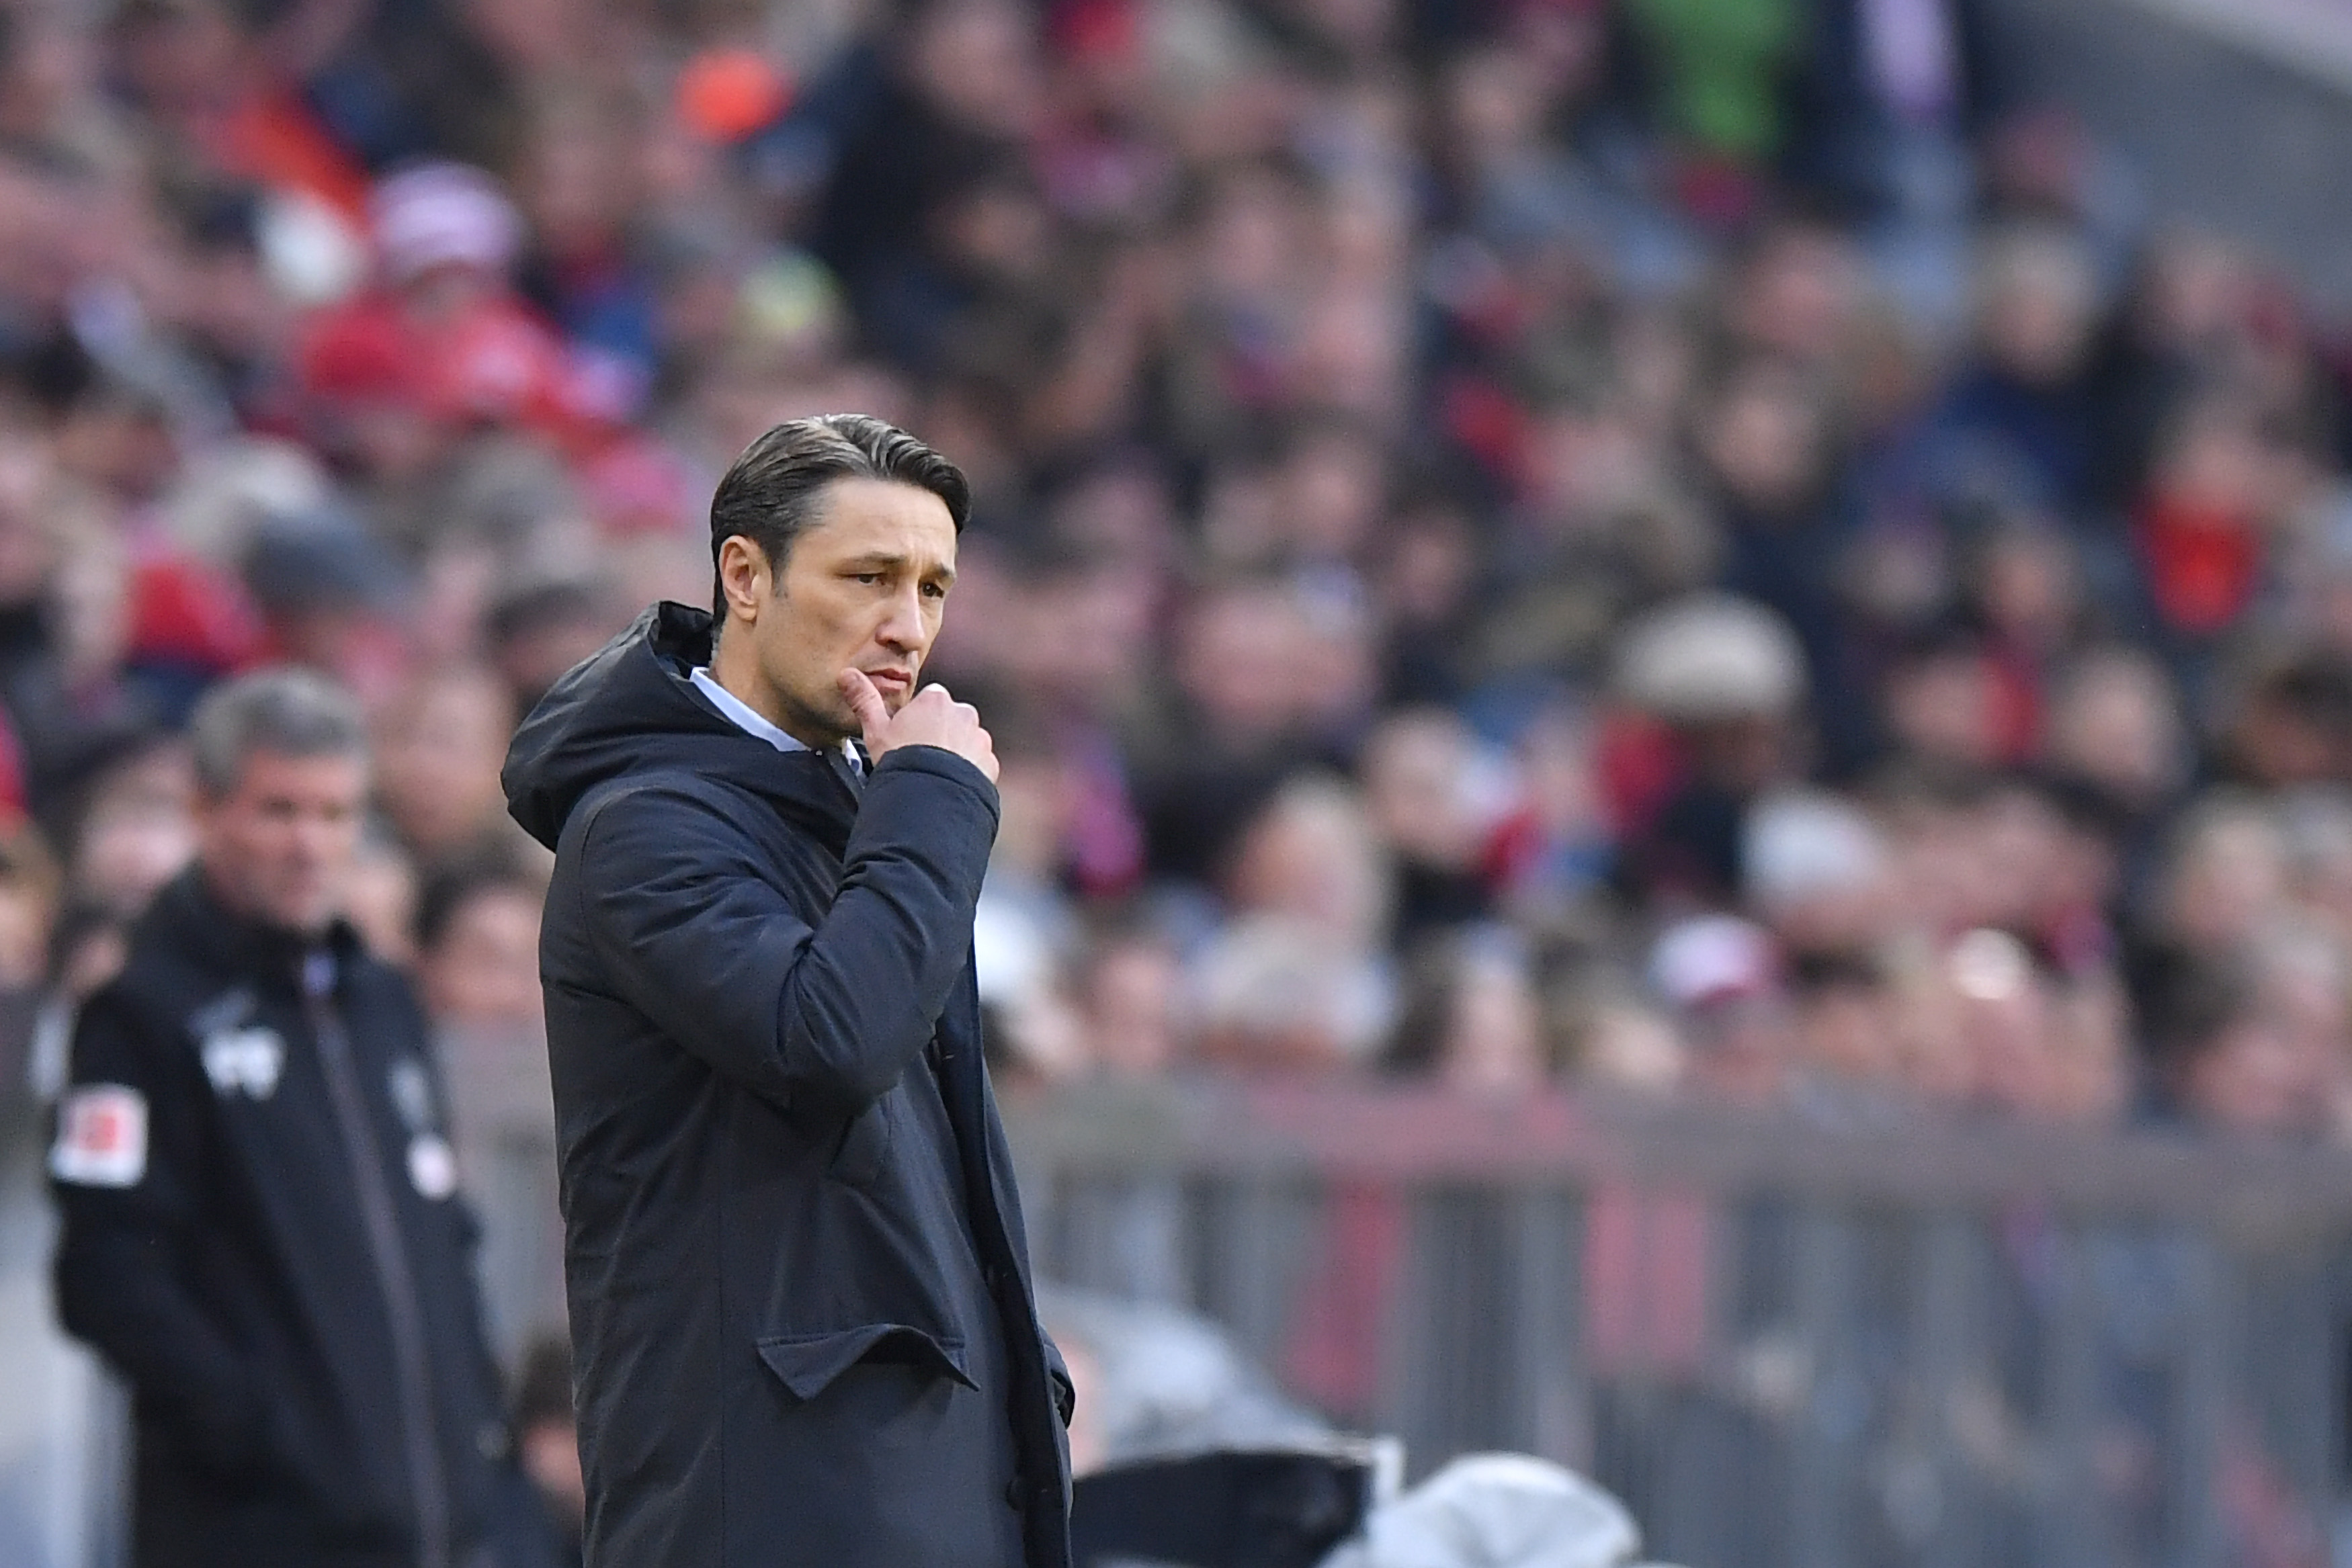 MUNICH, GERMANY - NOVEMBER 24: Head coach Niko Kovac of Bayern Muenchen gives his team instructions during the Bundesliga match between FC Bayern Muenchen and Fortuna Duesseldorf at Allianz Arena on November 24, 2018 in Munich, Germany. (Photo by Sebastian Widmann/Bongarts/Getty Images)